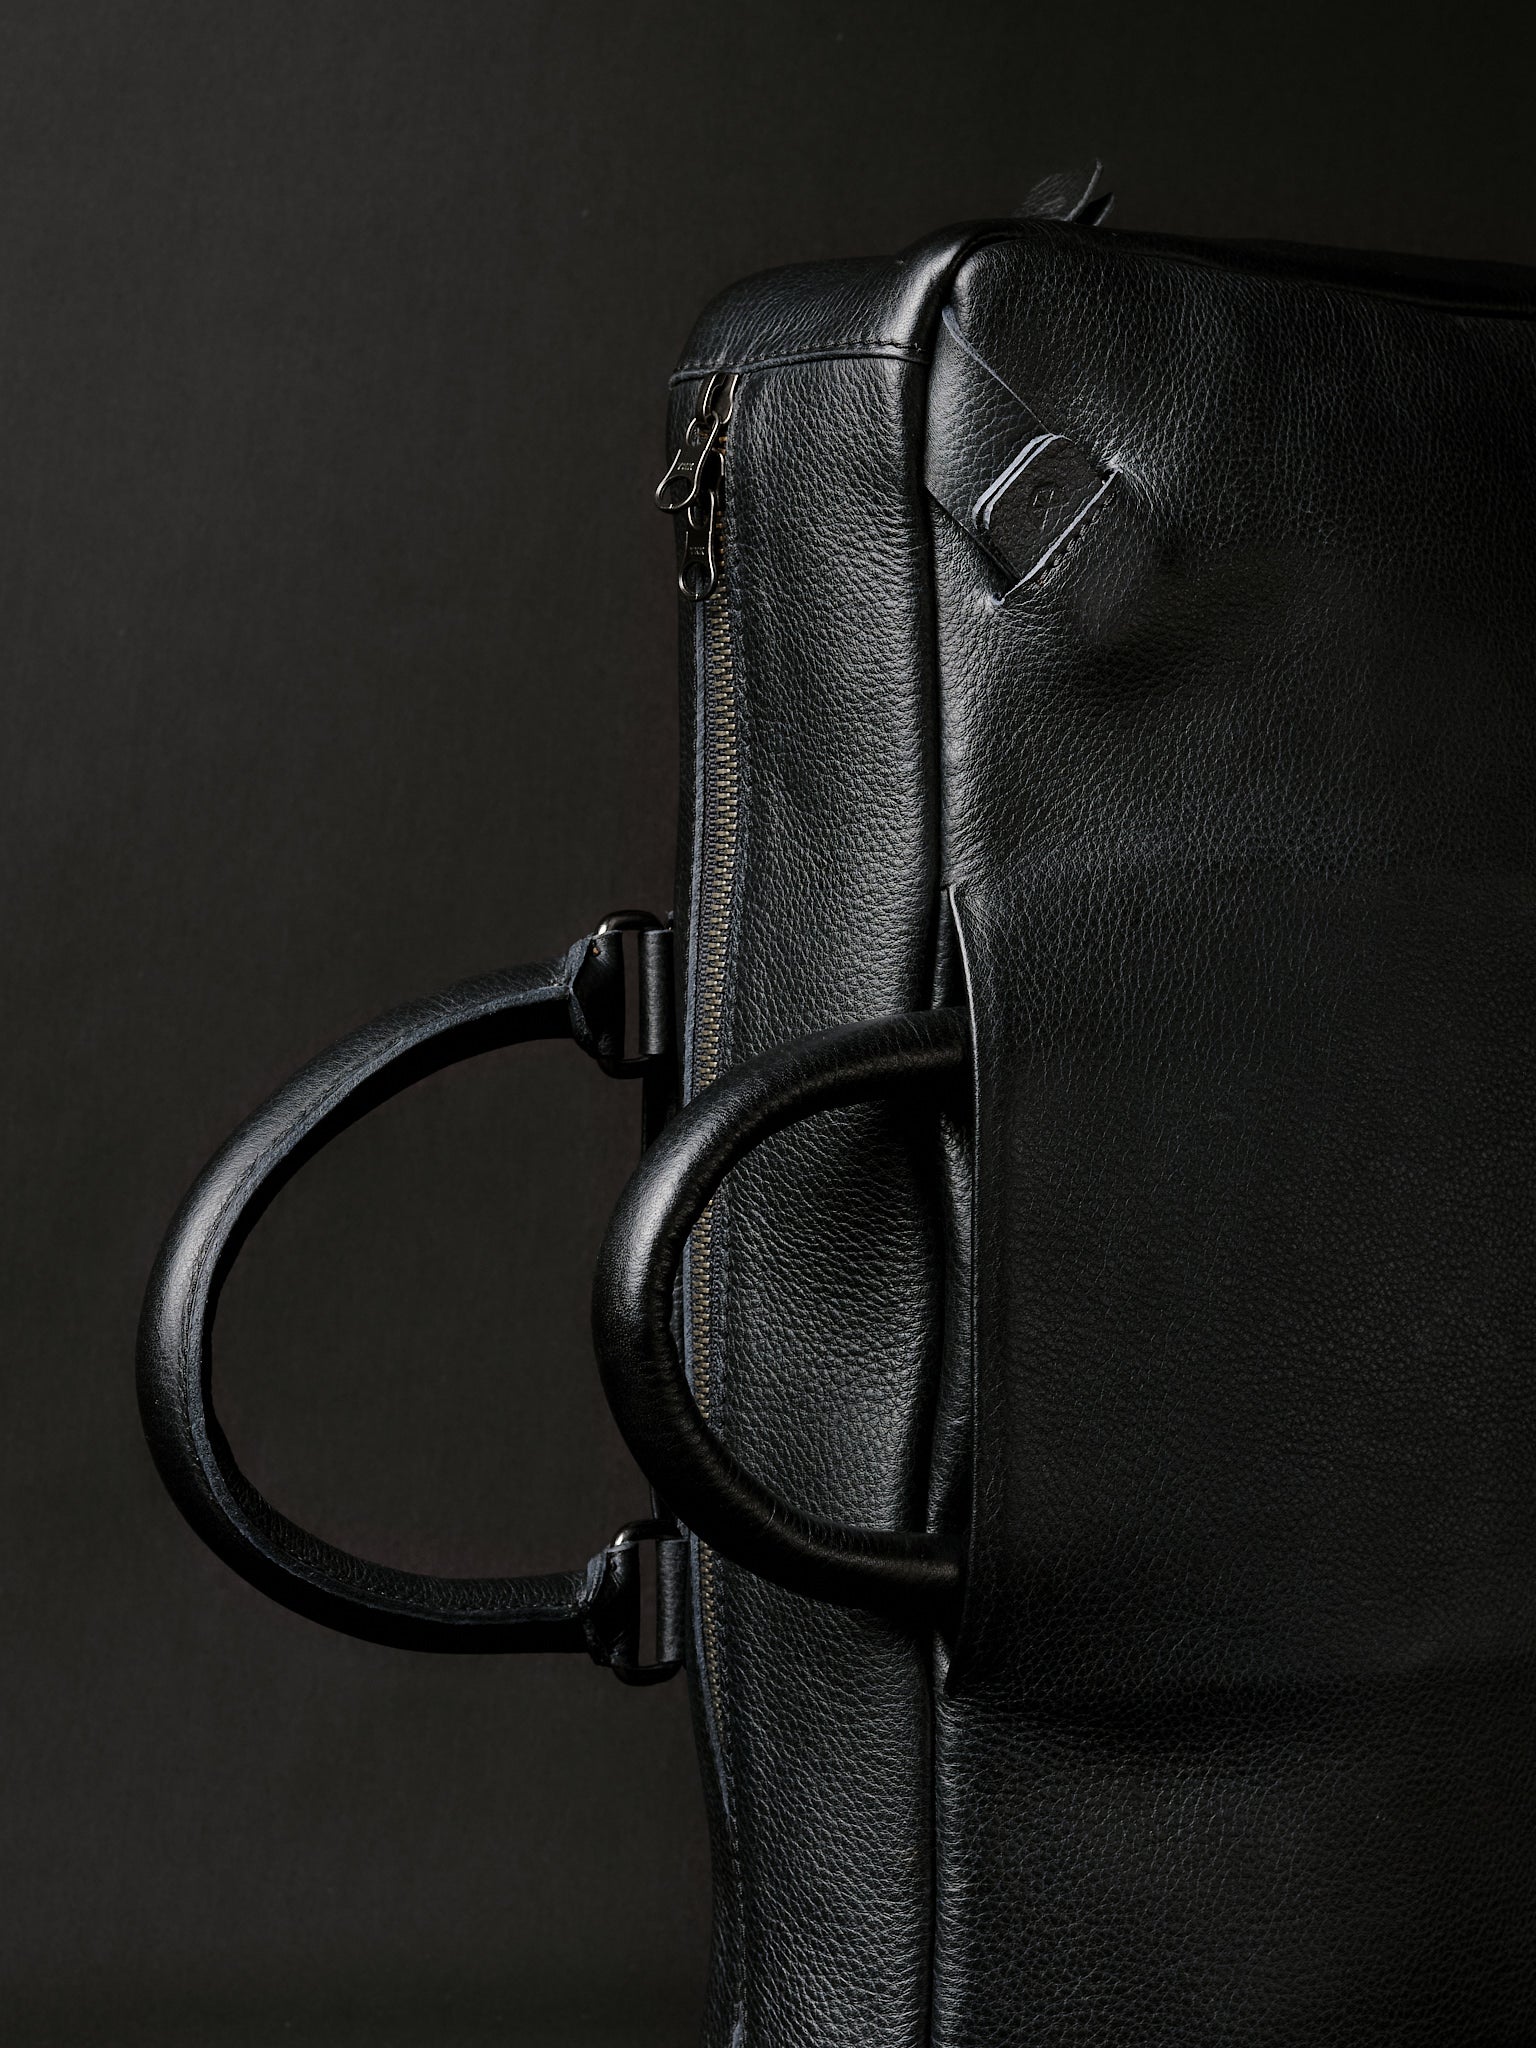 Retractable handles. Briefcase Backpack Combination Black by Capra Leather